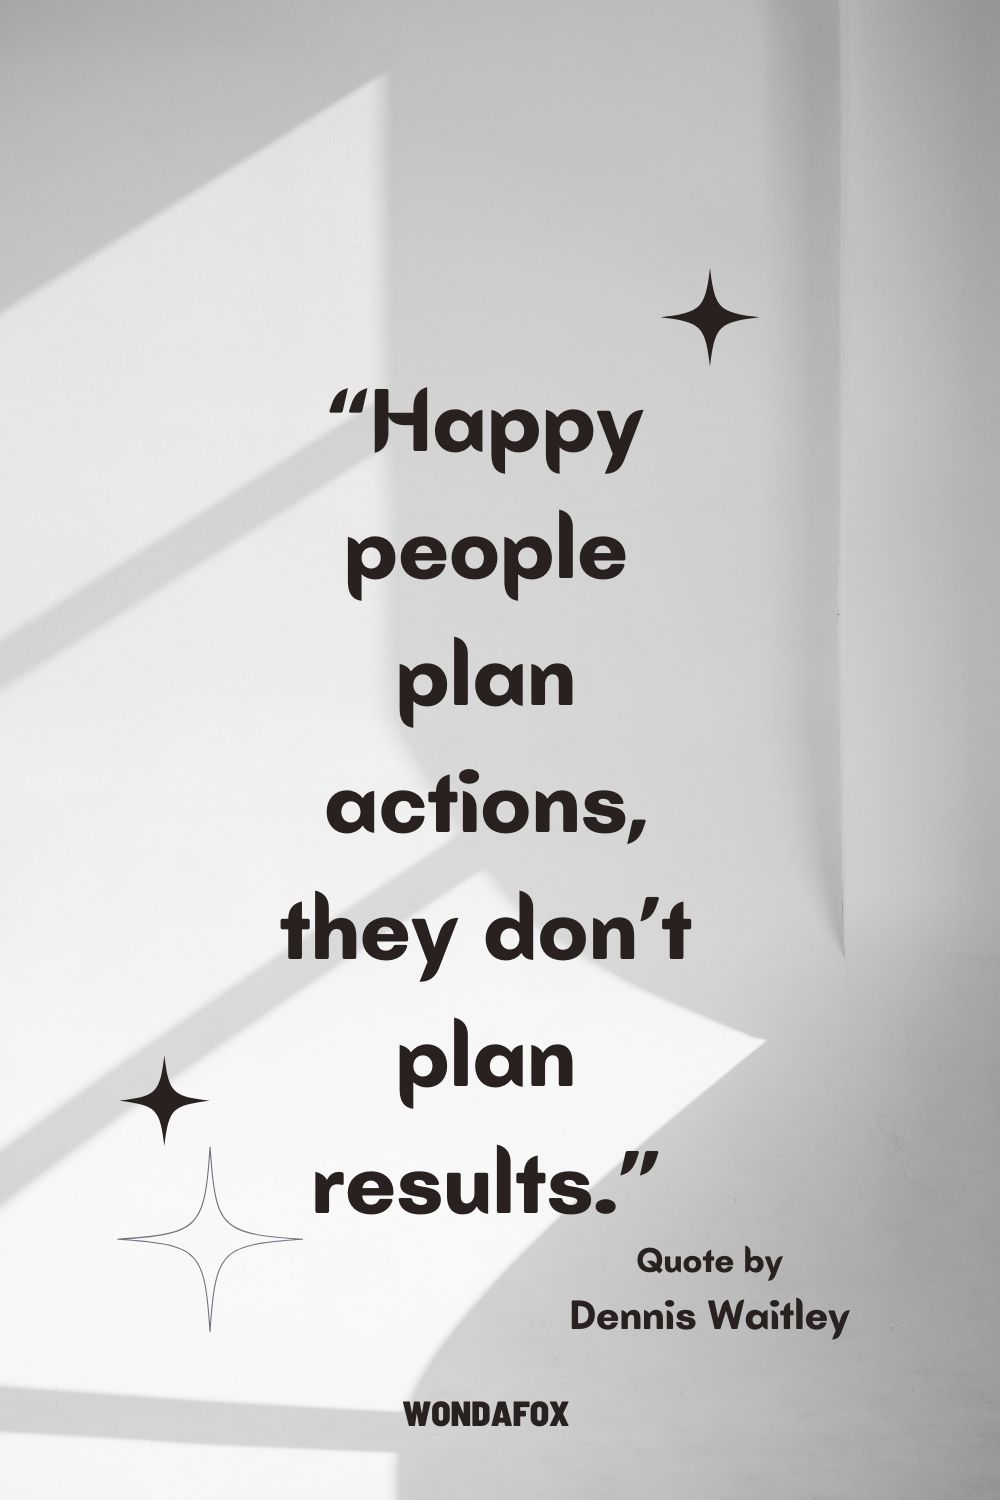 “Happy people plan actions, they don’t plan results.”
Dennis Waitley